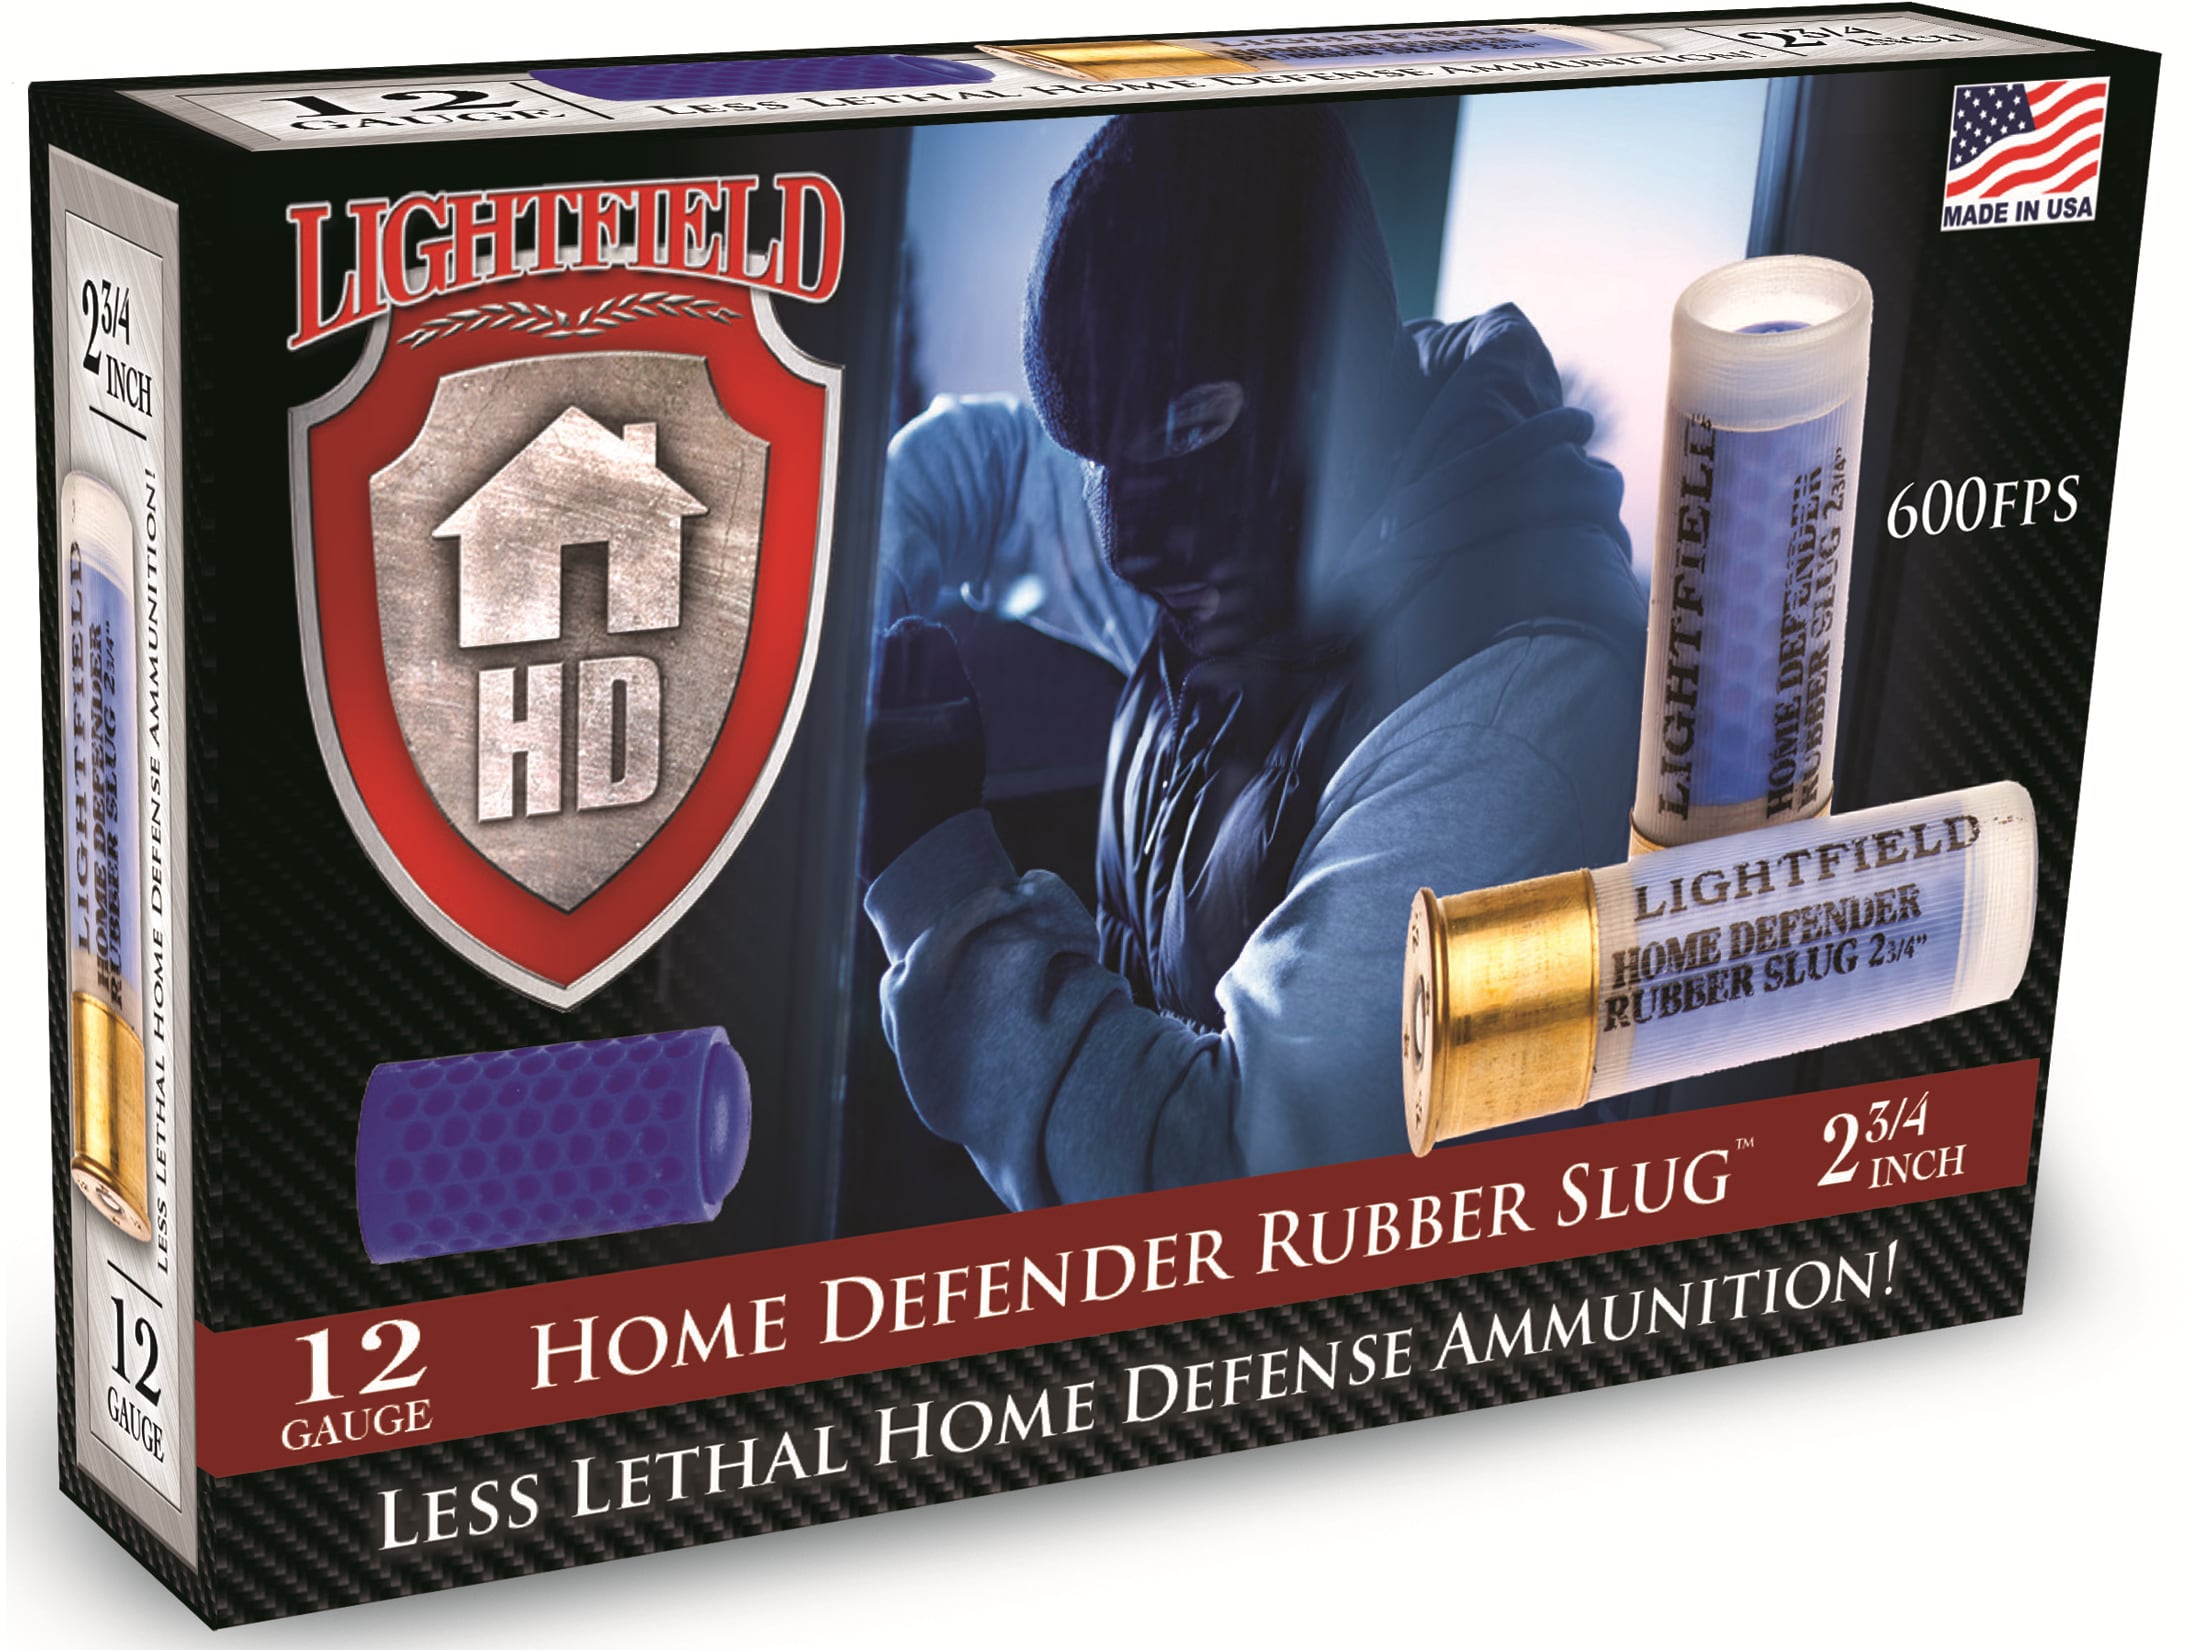 The Home Defender Rubber Slug load is intended for serious defensive use. 